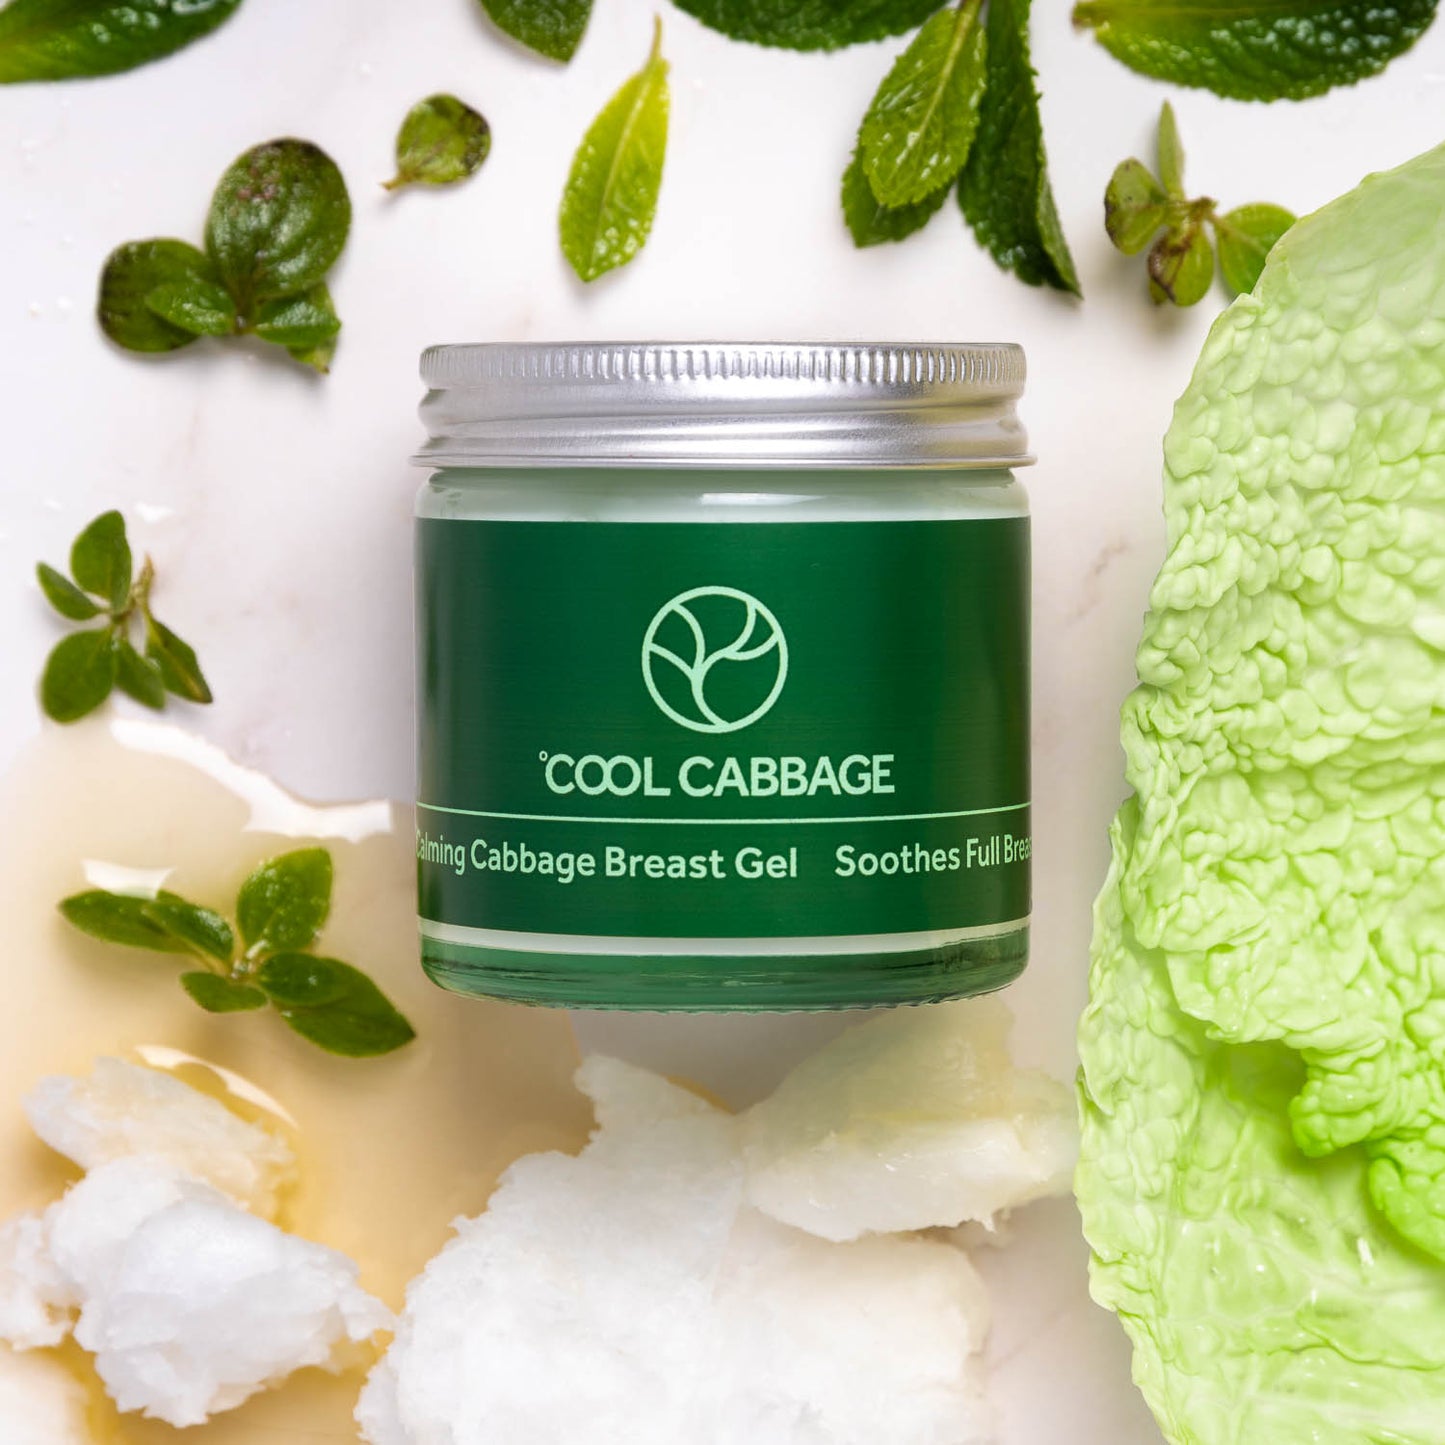 cabbage breast cream by Cool Cabbage